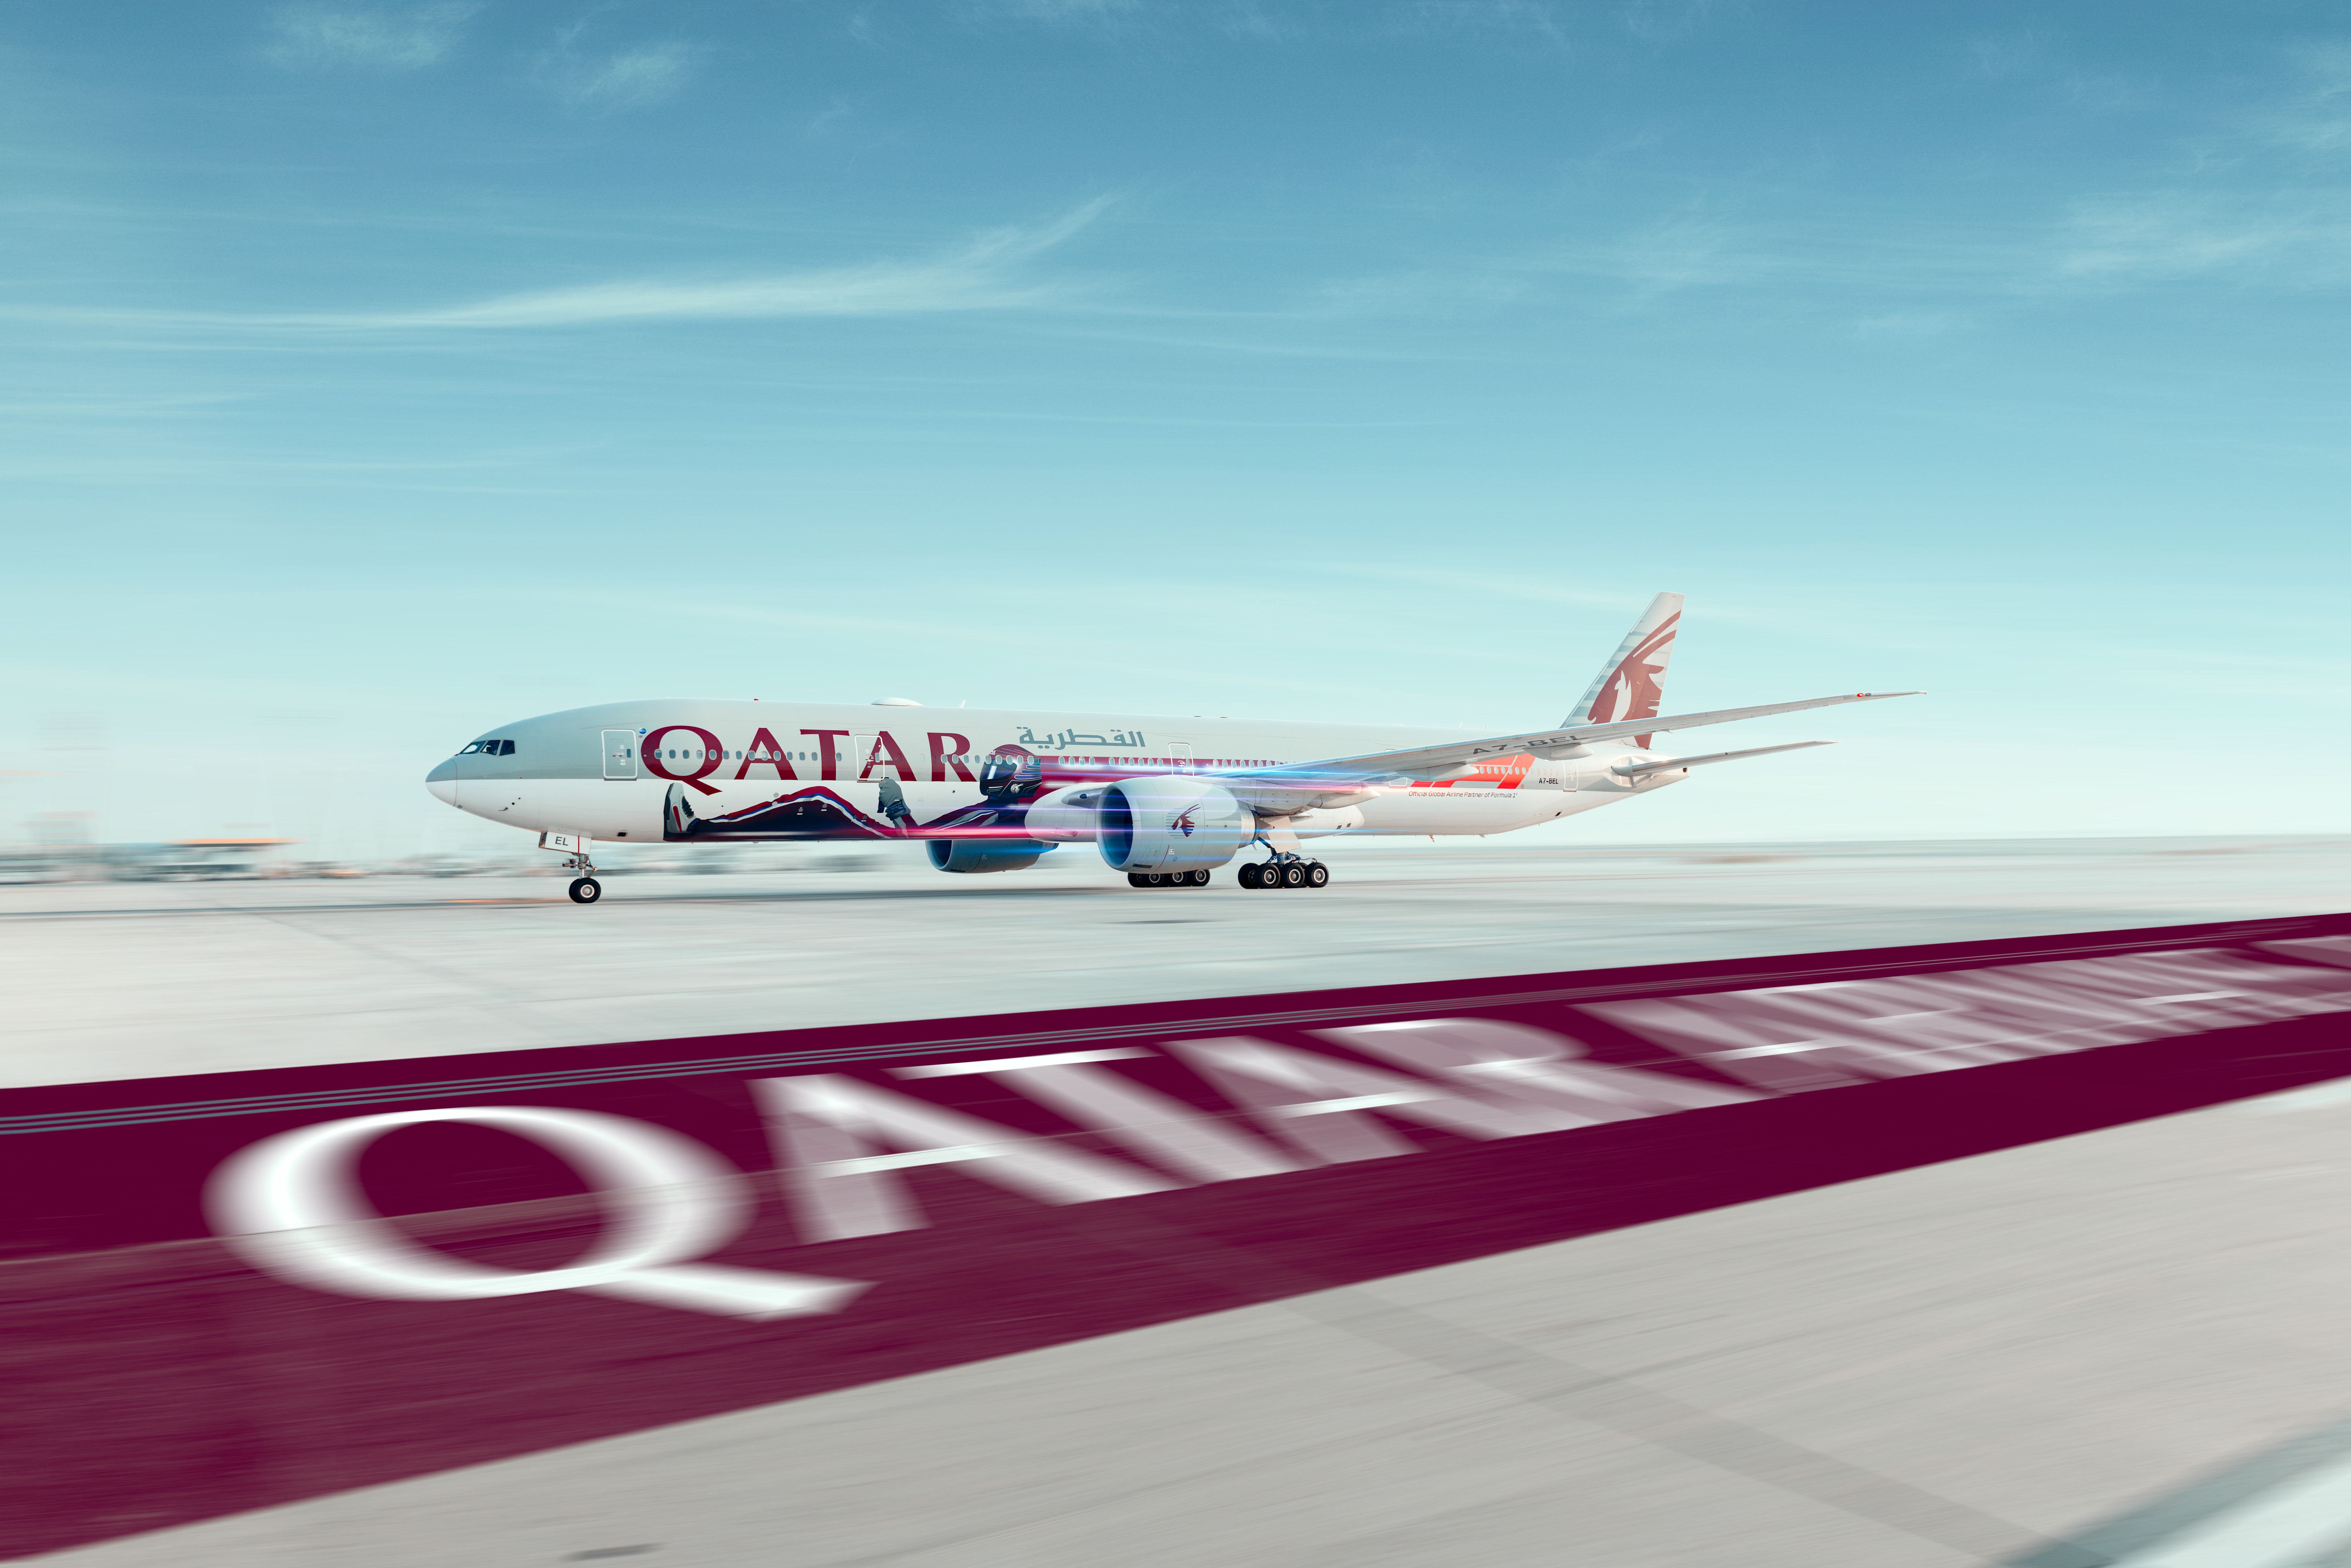 Qatar Airways aircraft in F1 colors parked at the airport.